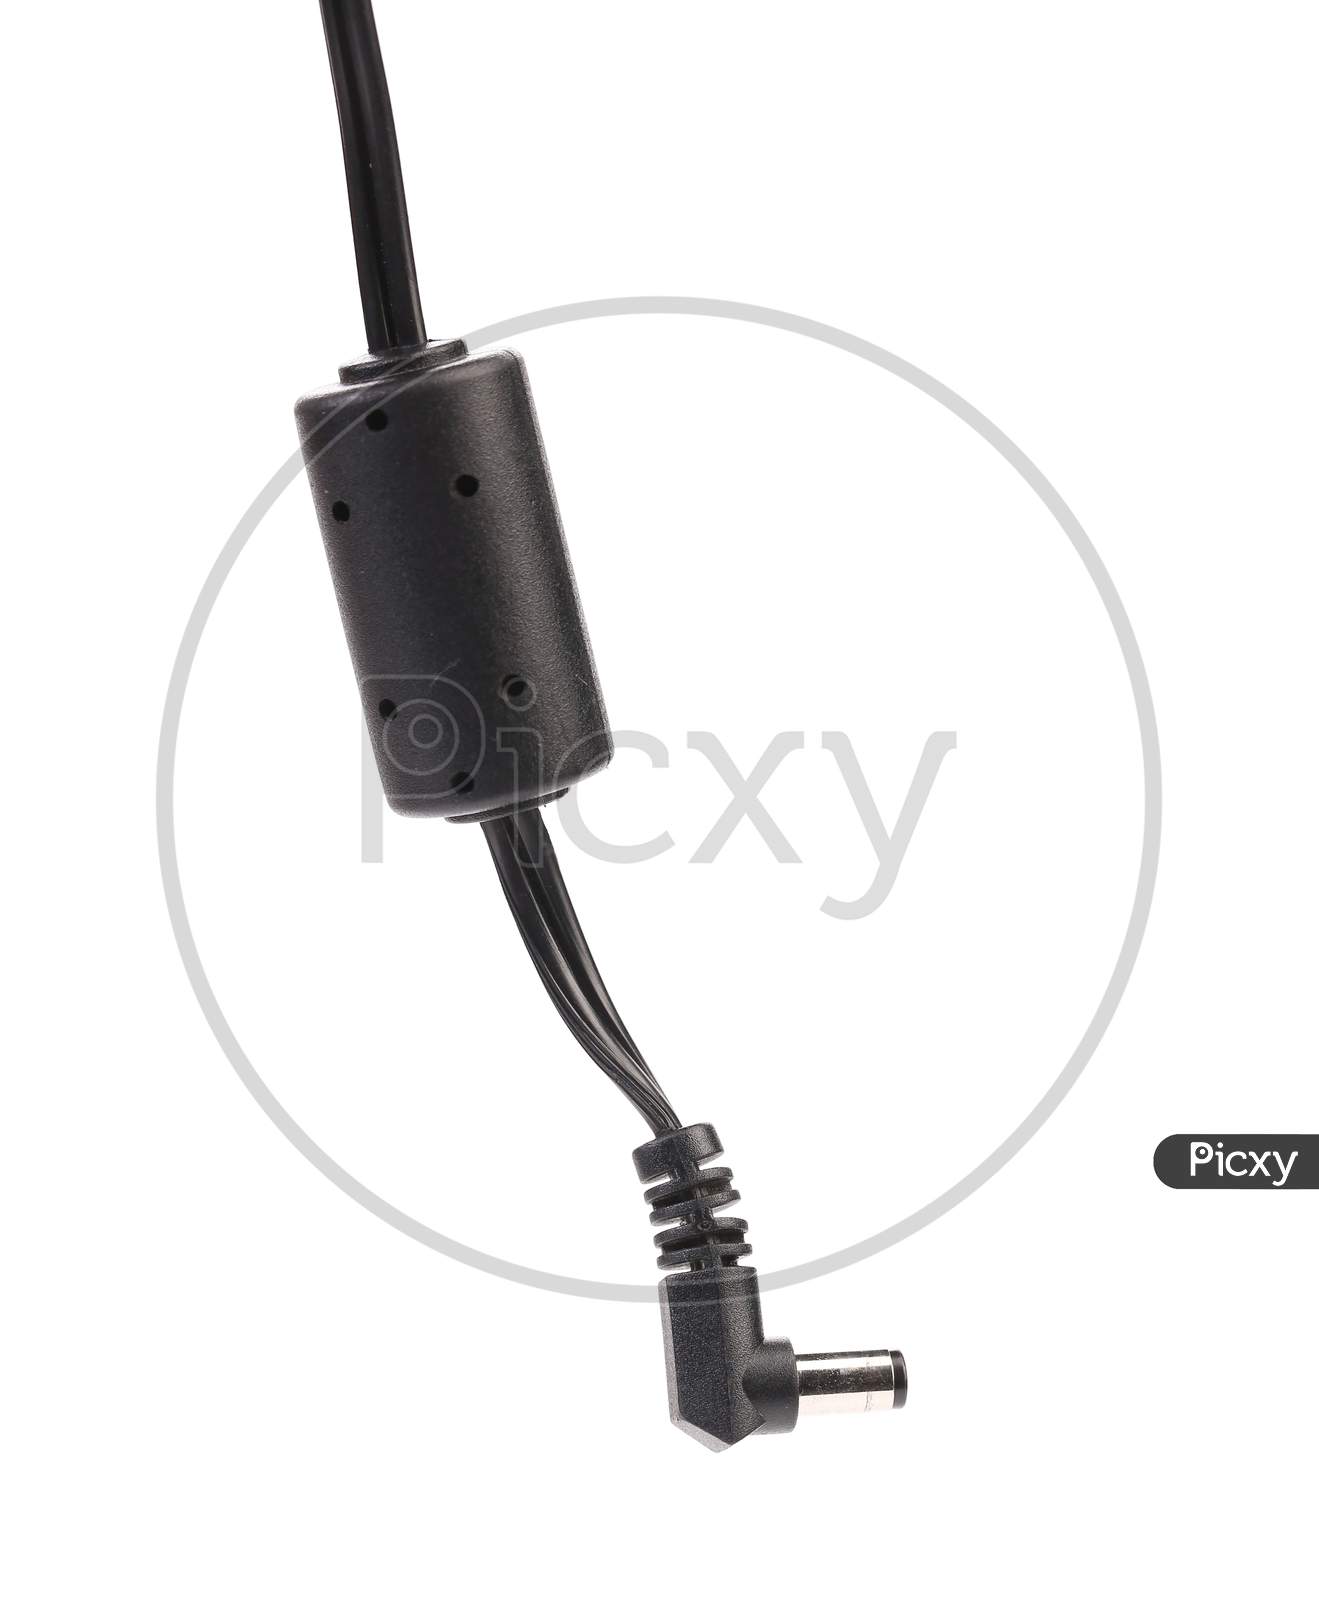 Close Up Of Plug Power For Device. Isolated On A White Background.